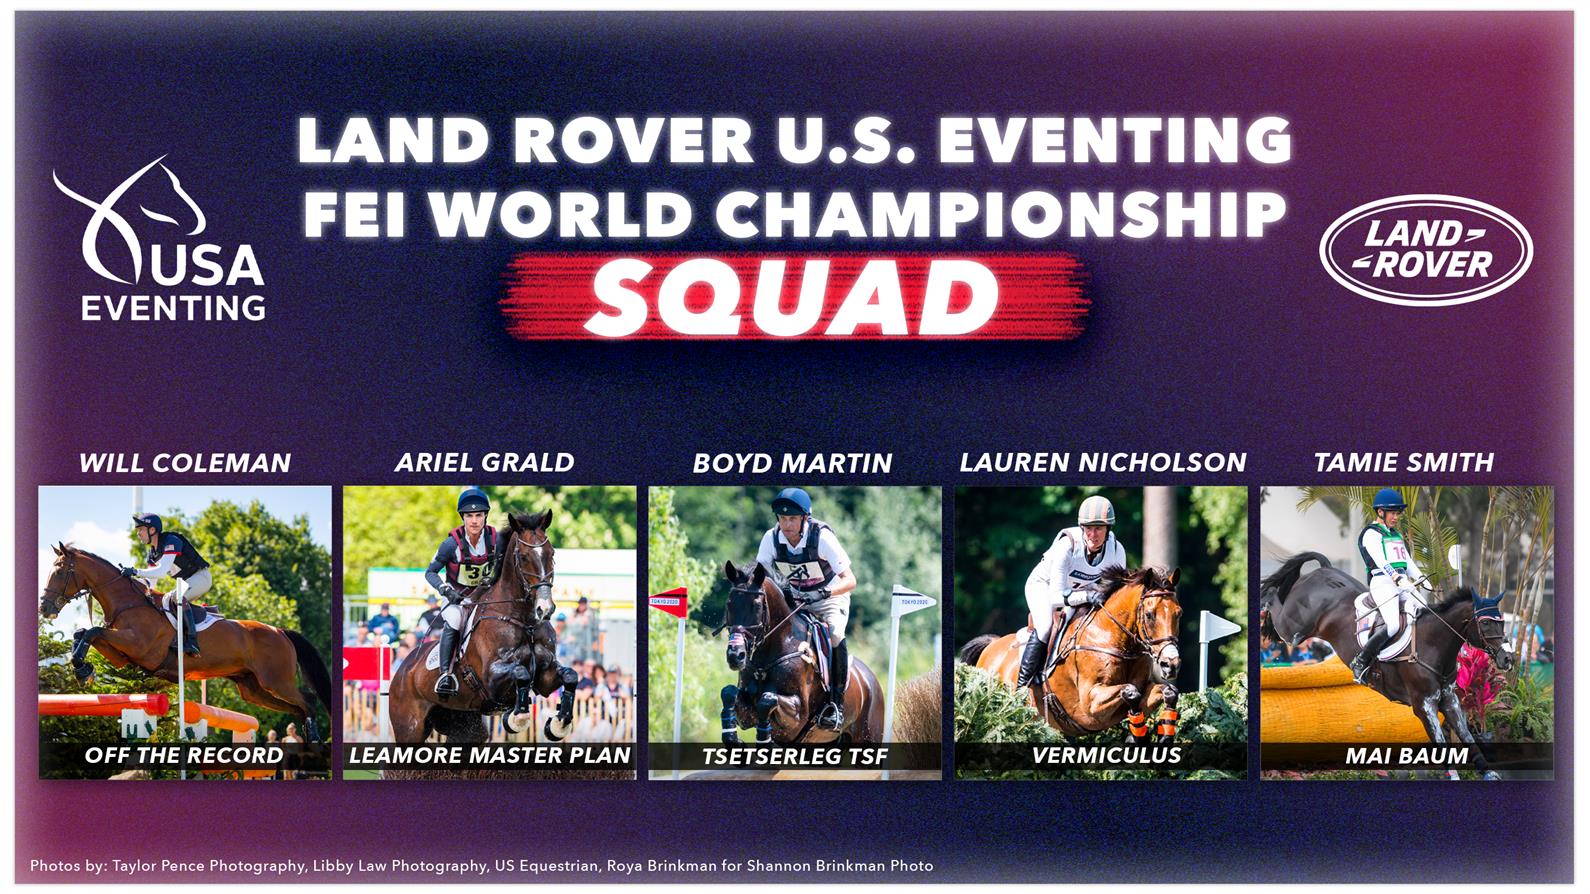 U.S. Eventing Team for the 2022 FEI World Championship